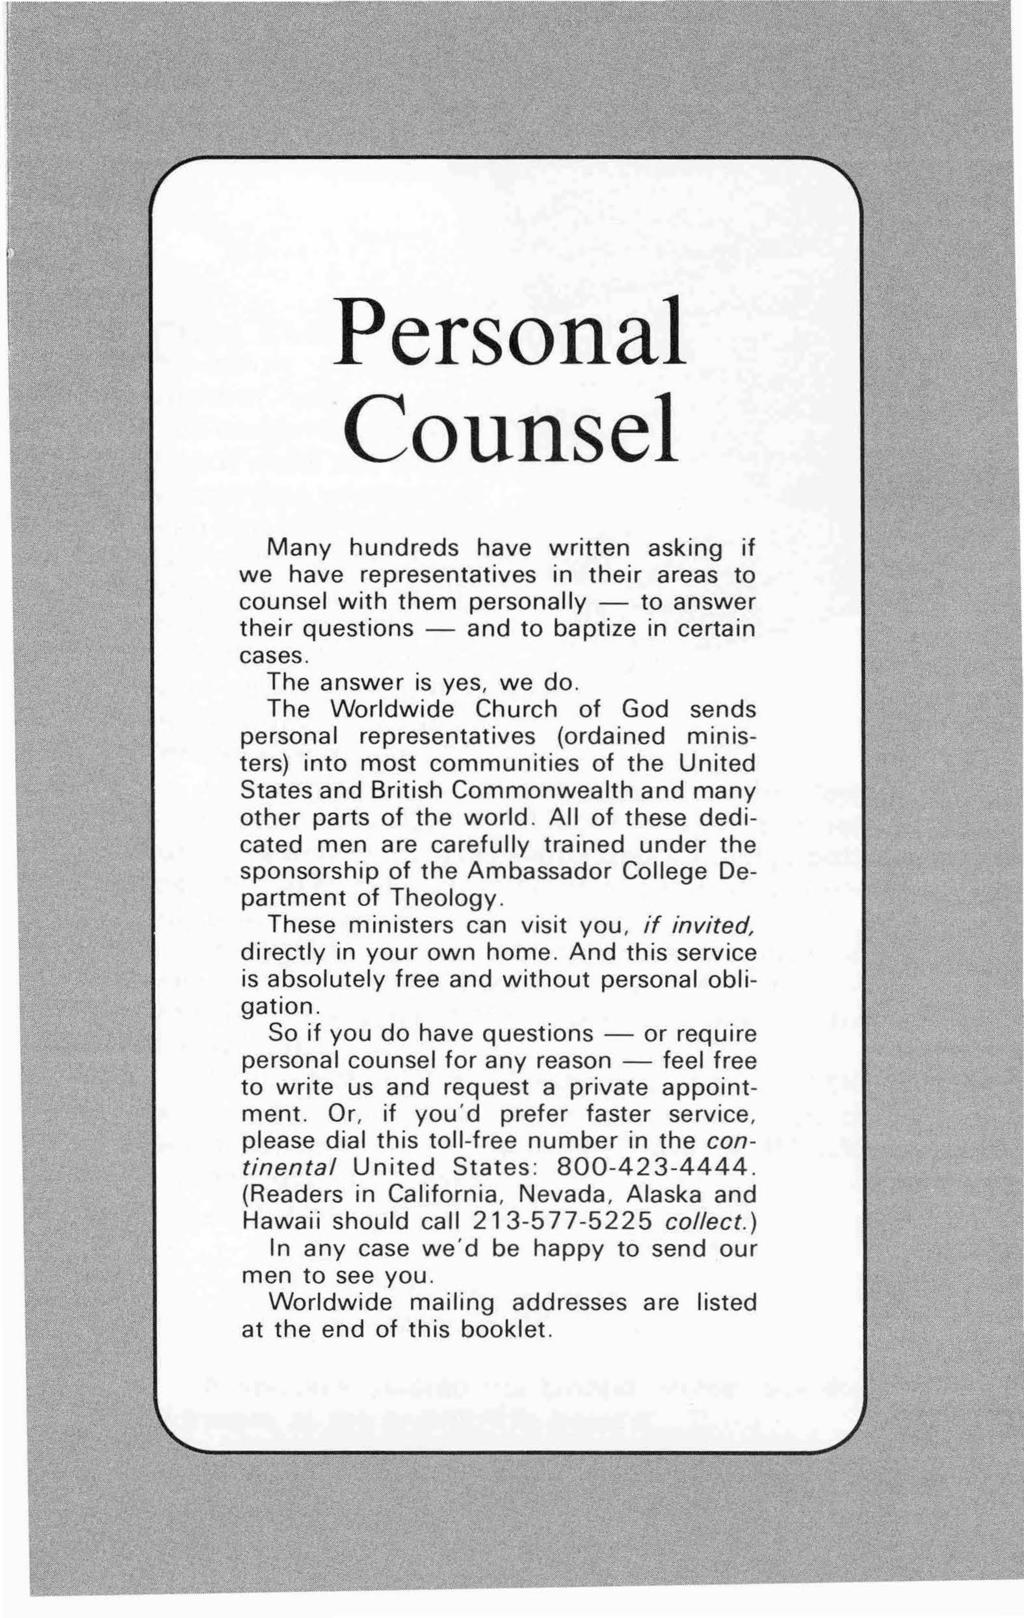 Personal Counsel Many hundreds have w ritten asking if we have representatives in their areas to counsel with them personally - to answer their questions - and to baptize in certain cases.